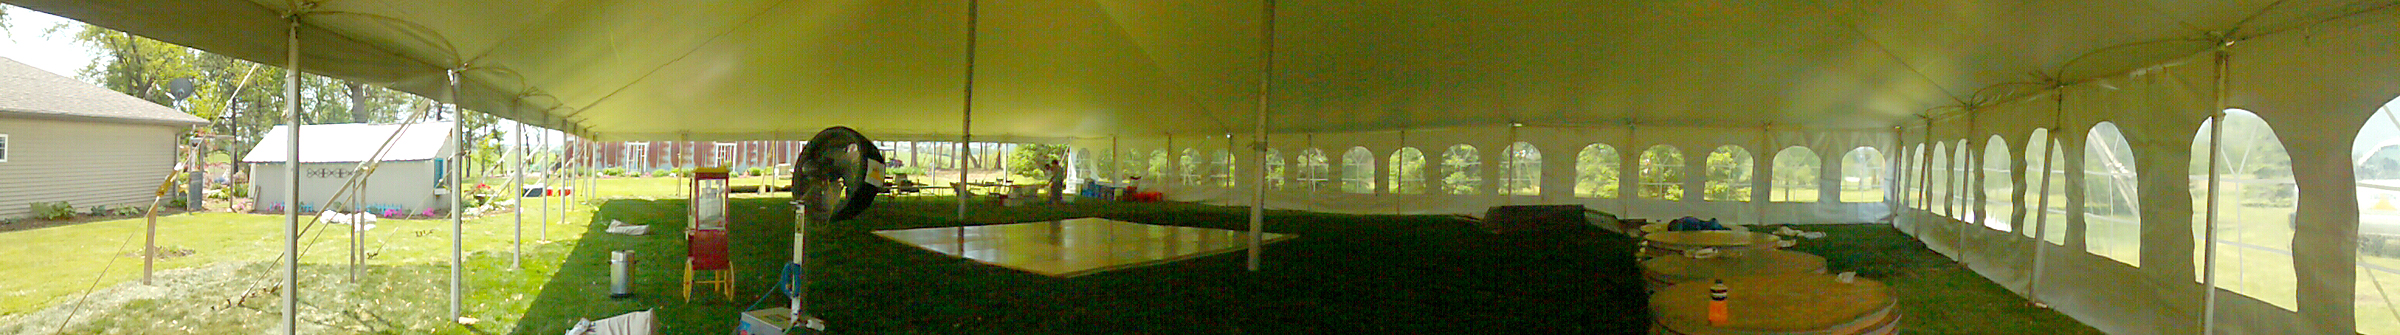 Panoramic view from under the 60' x 90' Genesis rope and pole event tent.